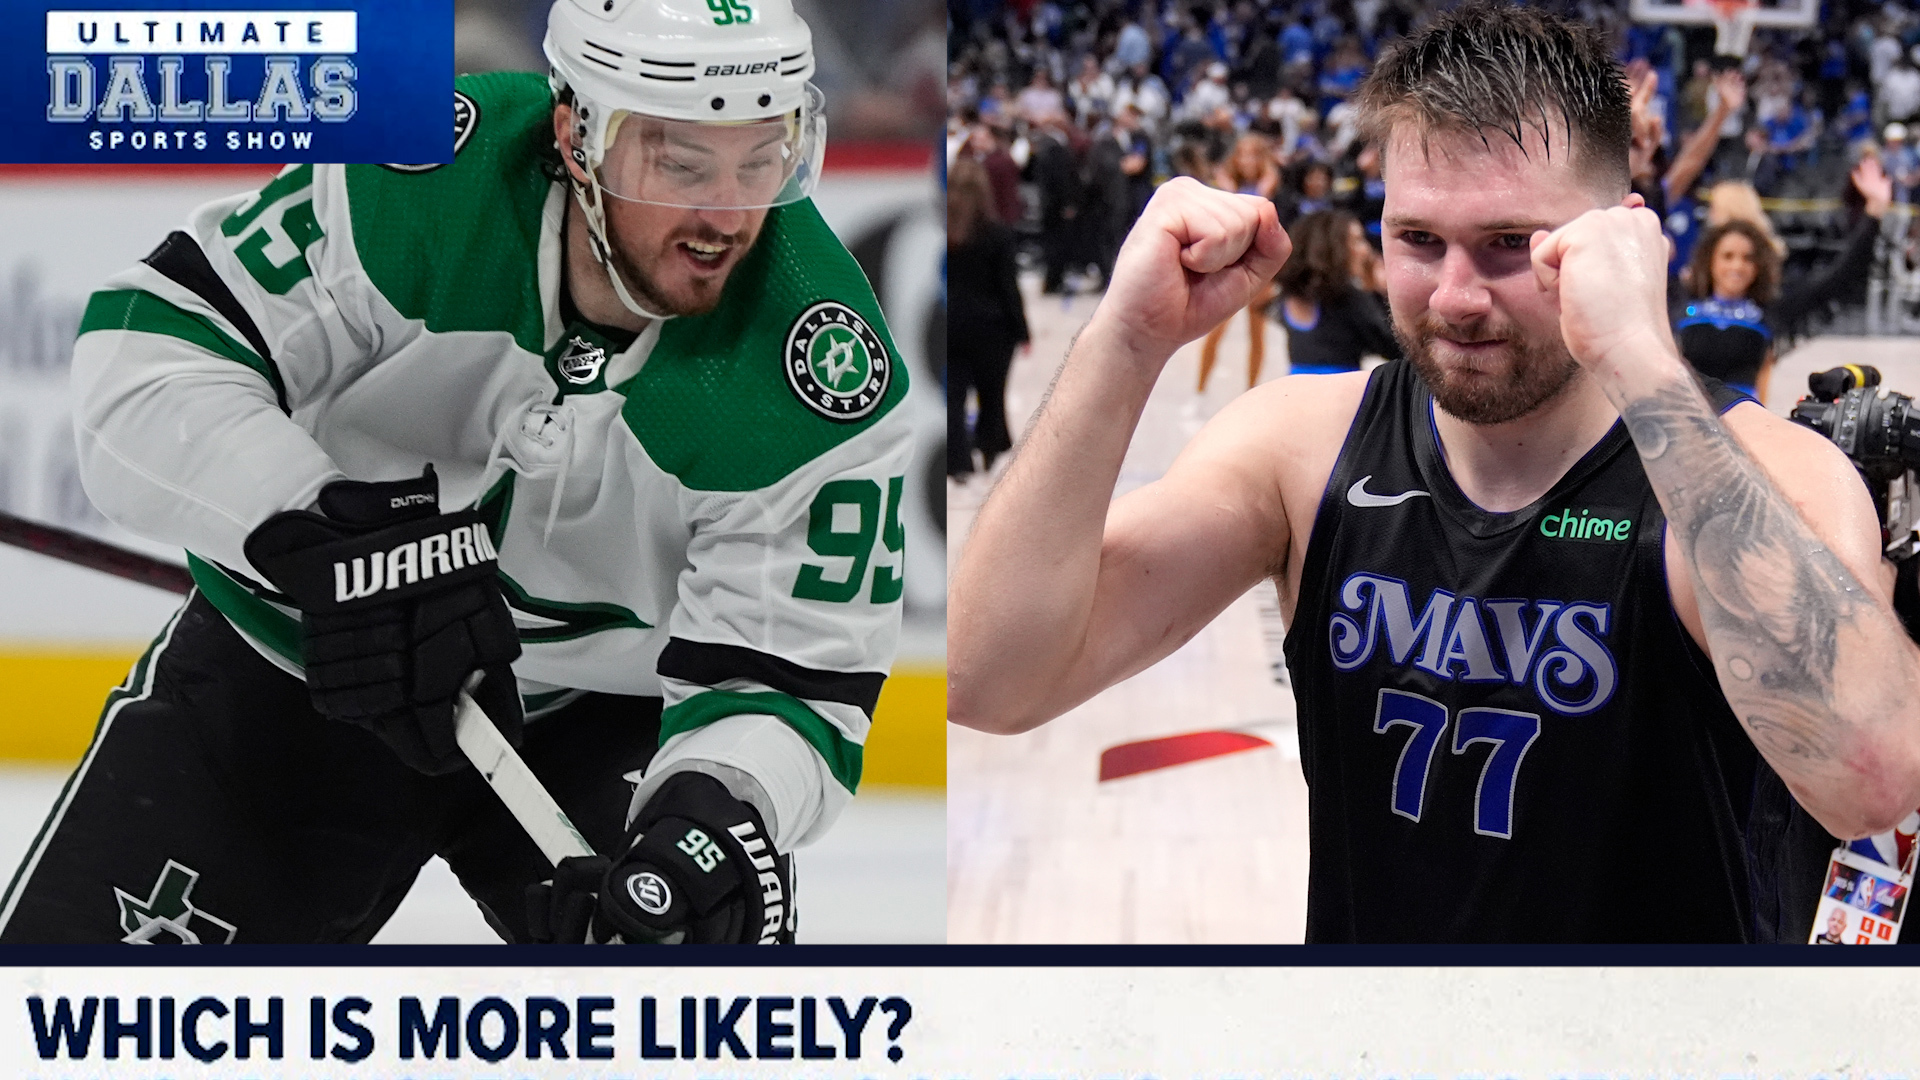 Which is more likely to play for a title this year: the Mavericks or the Stars? That's the main question on a brand new segment on the Ultimate Dallas Sports Show.